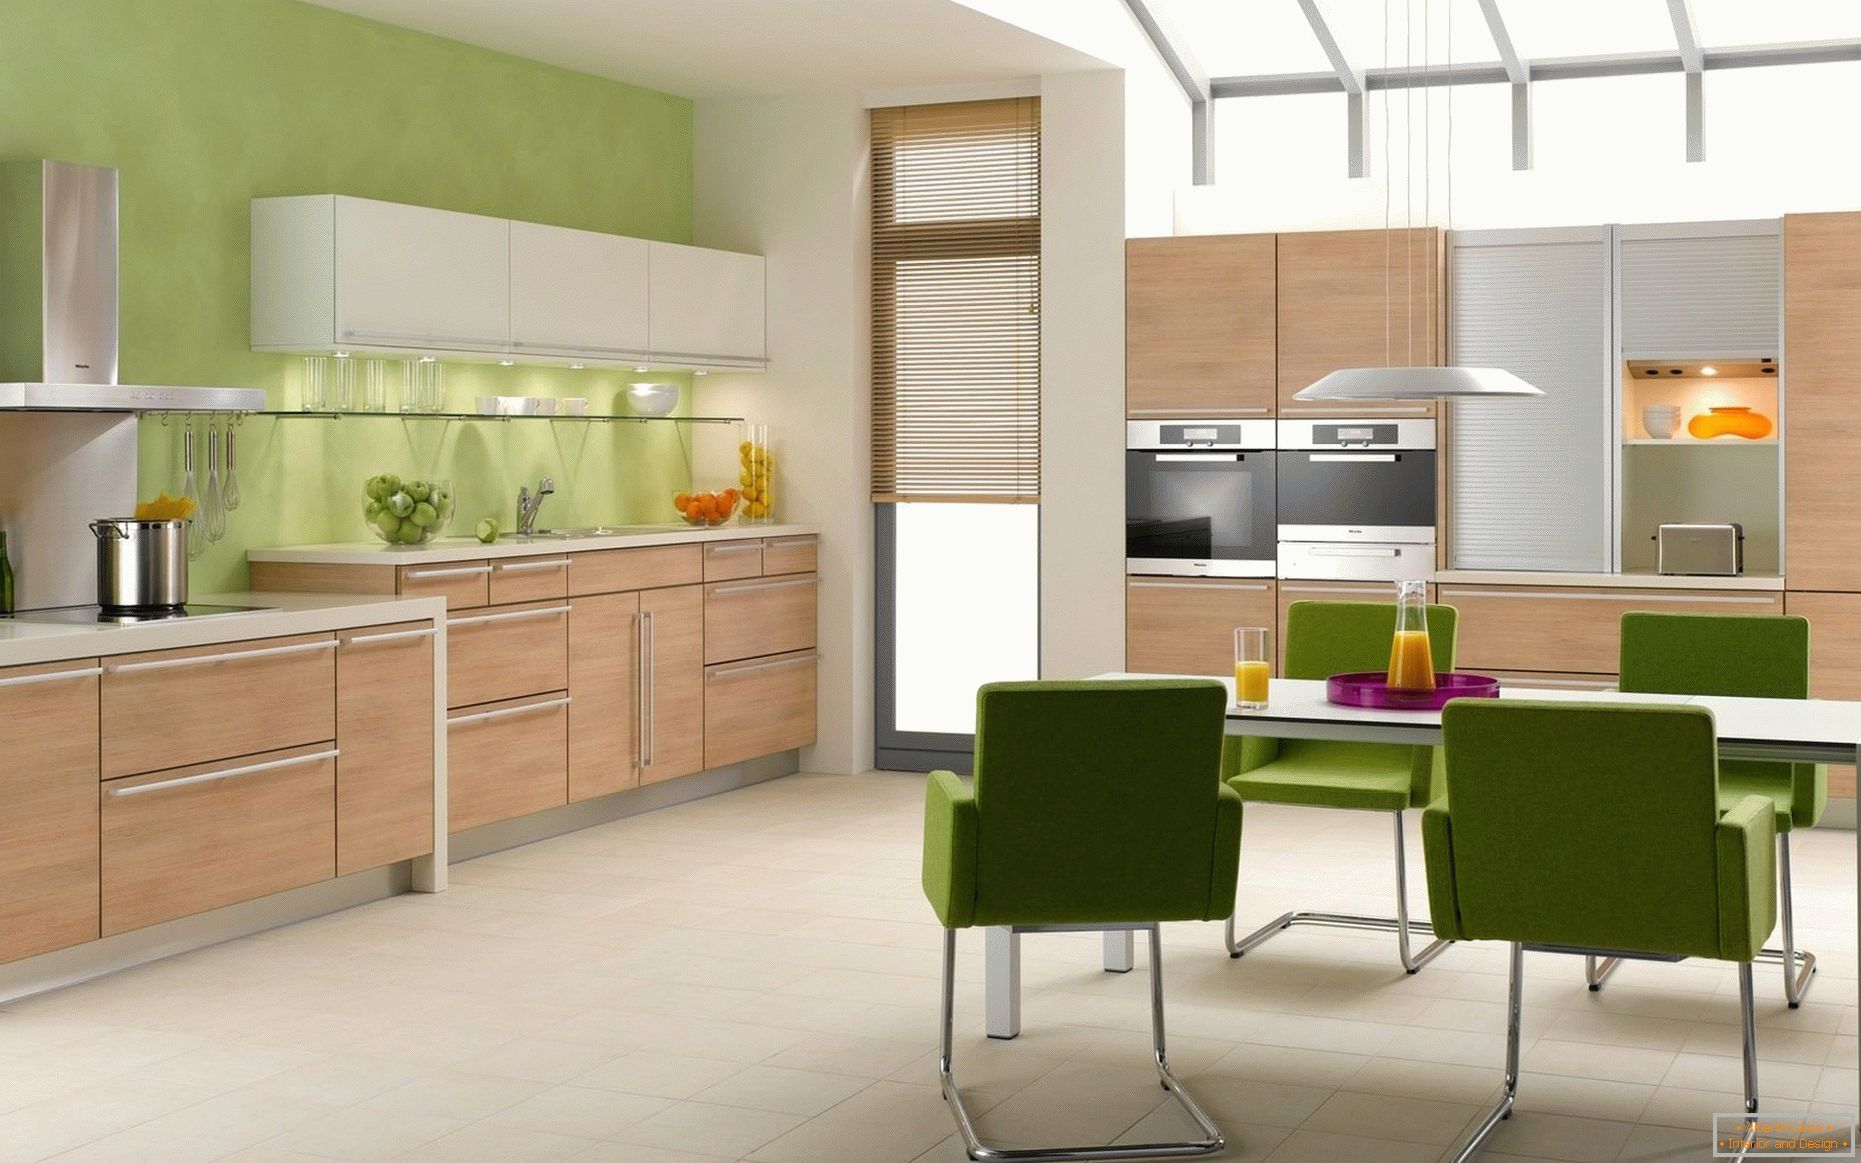 Wooden kitchen on a green background